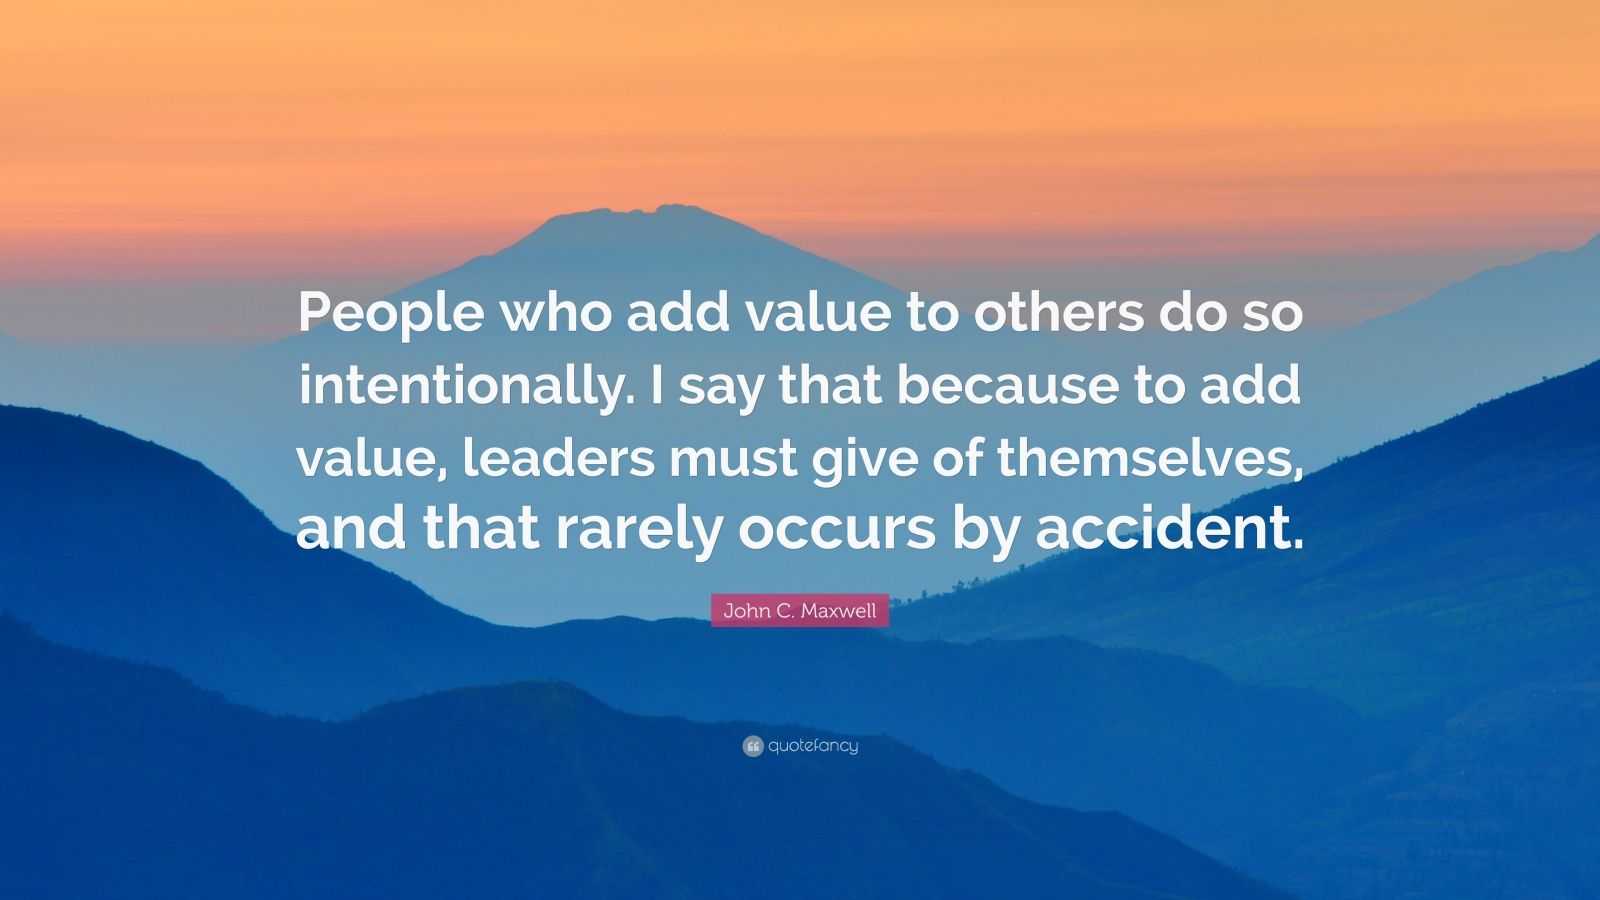 John C. Maxwell Quote: “People who add value to others do so